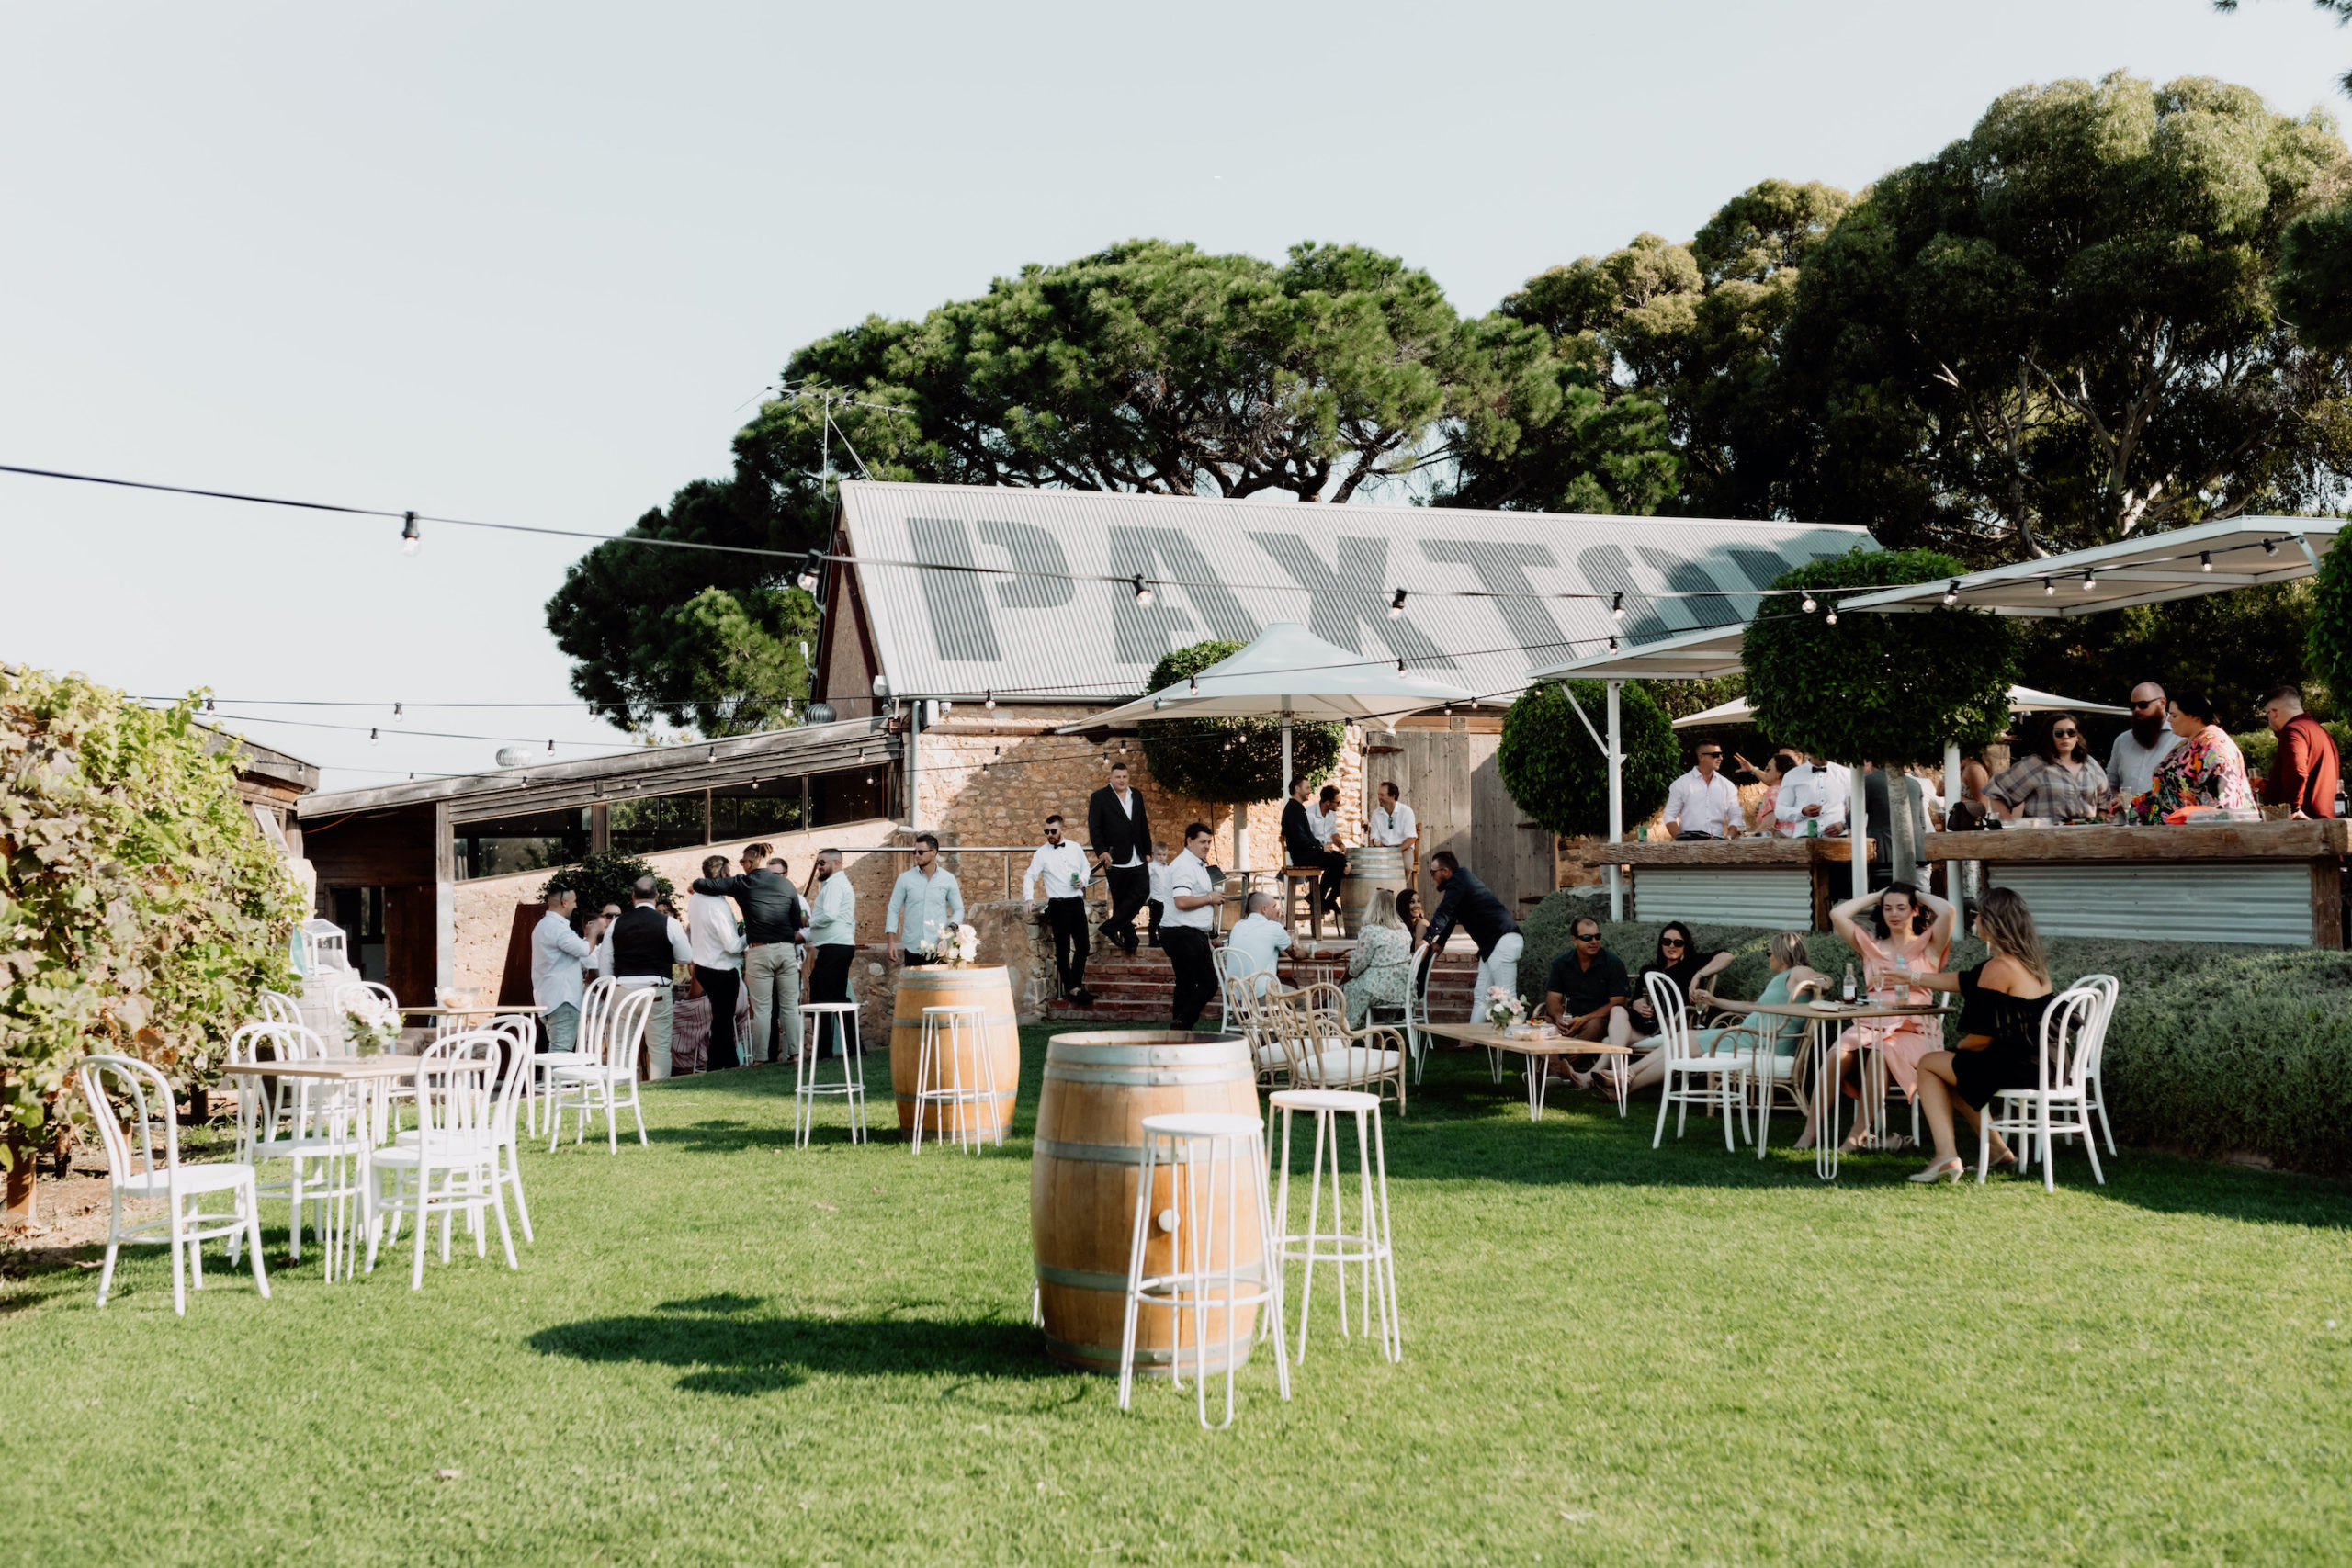 Famed already for its wine, McLaren Vale's Paxton is now offering their beautiful property for weddings and events exclusively through VENYU, with wine packages and flexible catering.